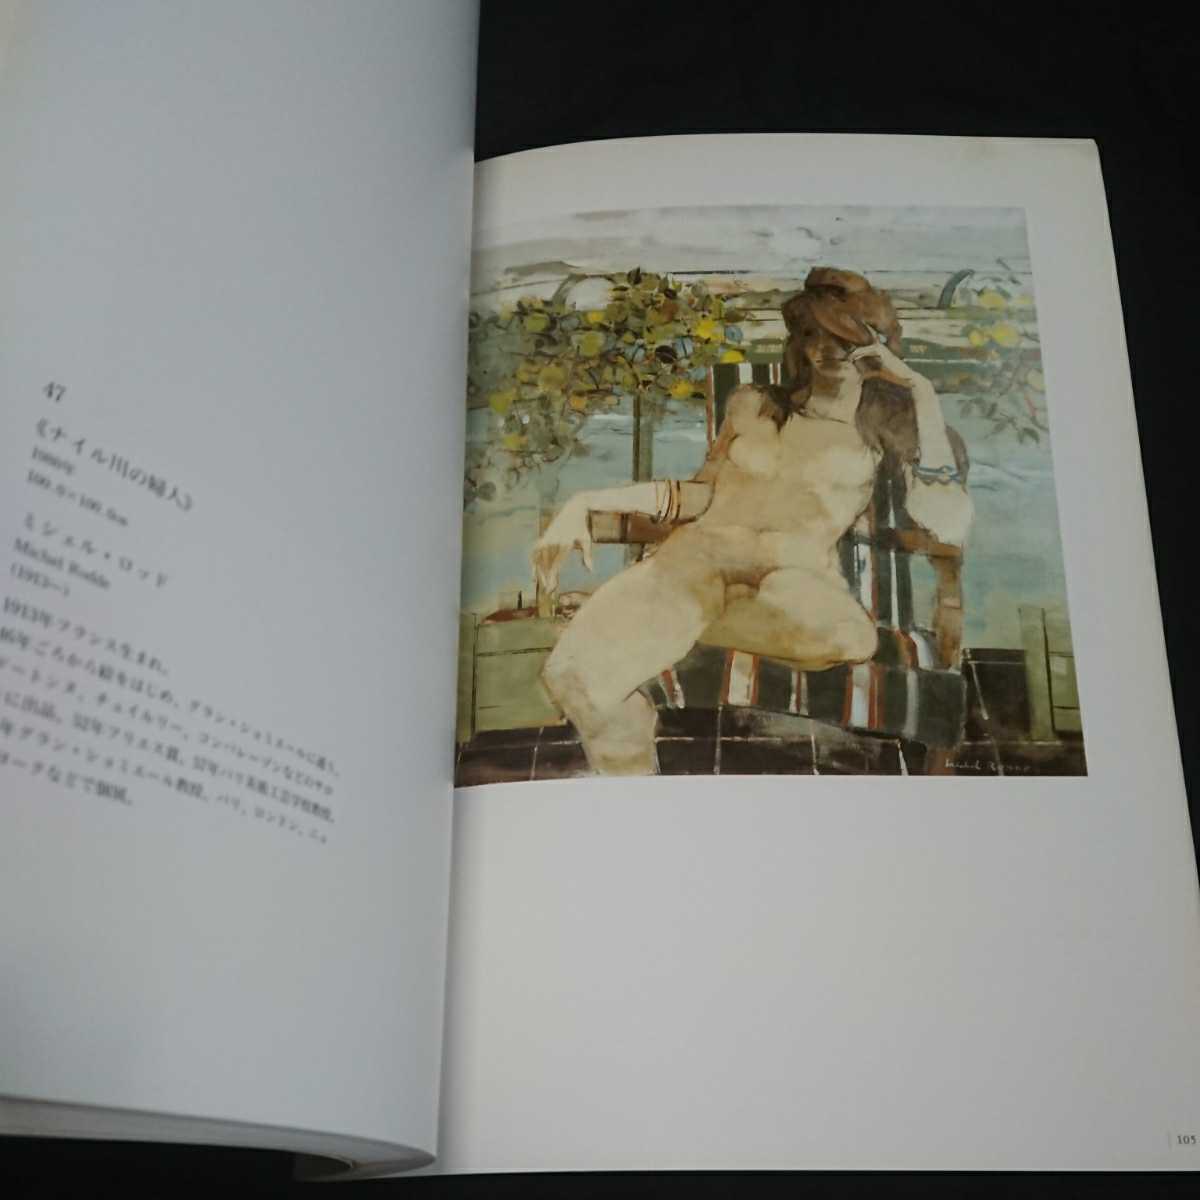  book of paintings in print llustrated book *20 century France picture exhibition 1996 year /. Takumi /ruo-vu llama nk Picasso rolan sun yuto Lilo car girl ki sling /.. height virtue /sskw1